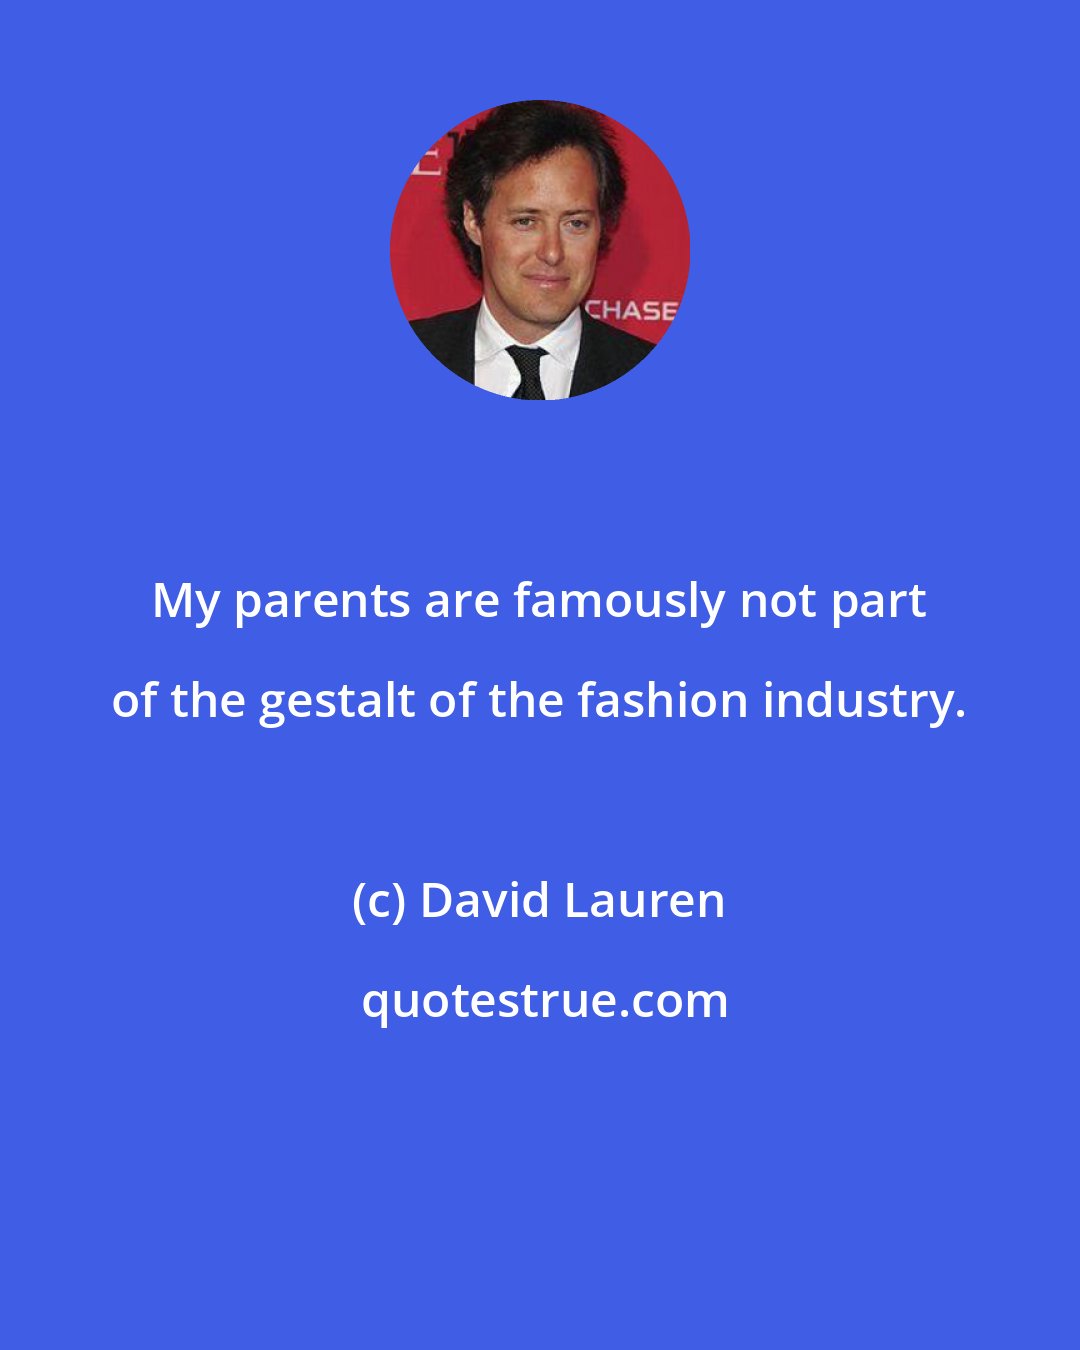 David Lauren: My parents are famously not part of the gestalt of the fashion industry.